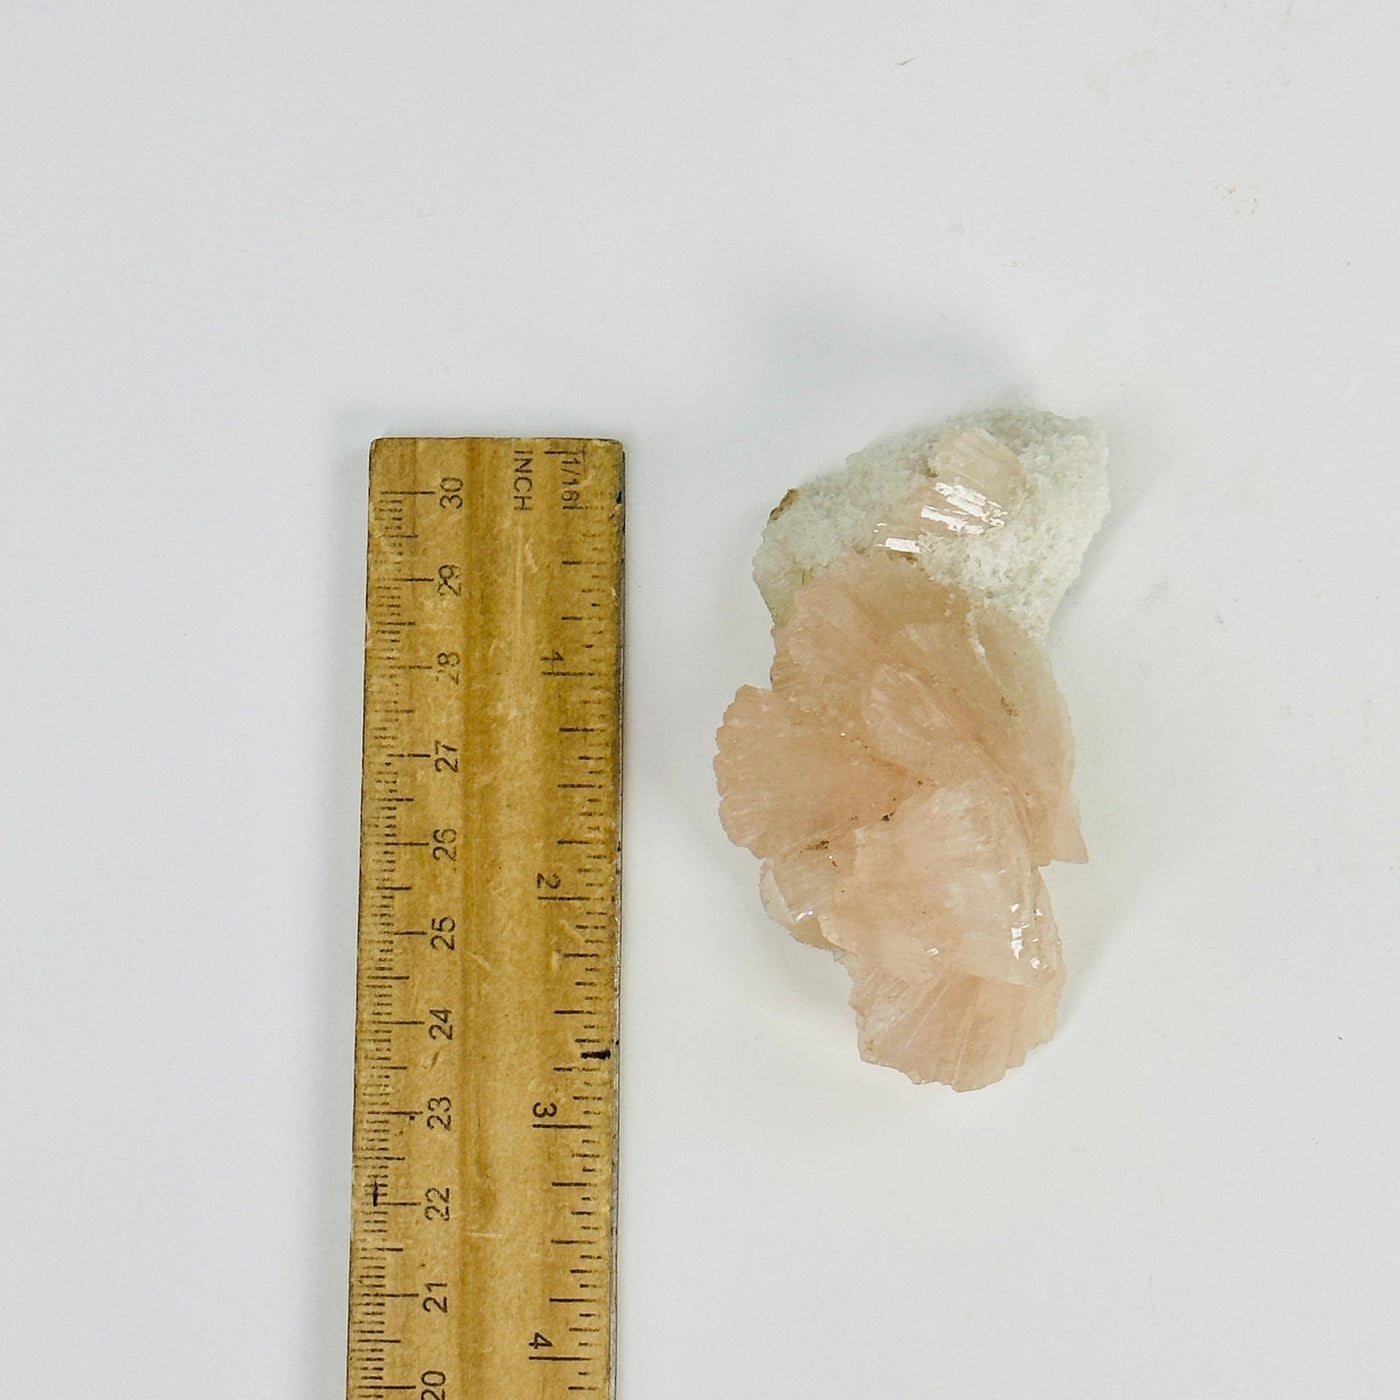 peach apophyllite cluster next to a ruler for size reference